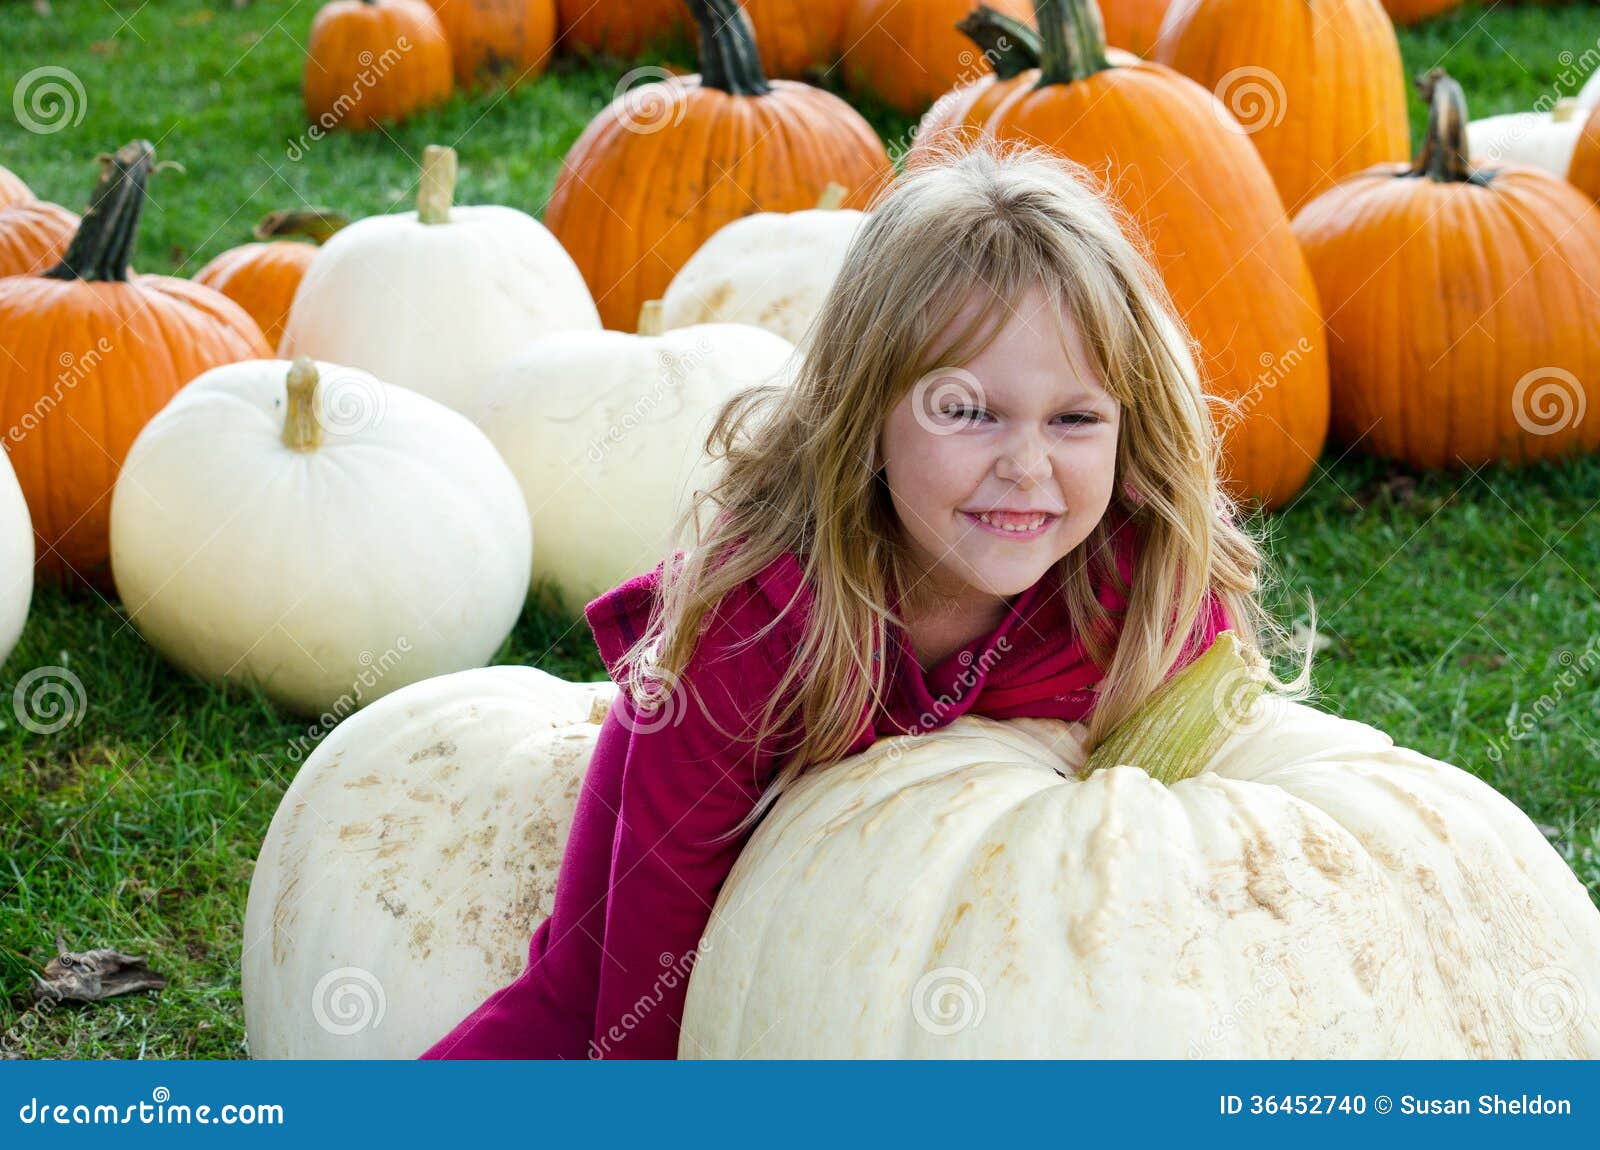 Child Tries To Pick Up Giant Pumpkin Stock Photo - Image of gourd ...